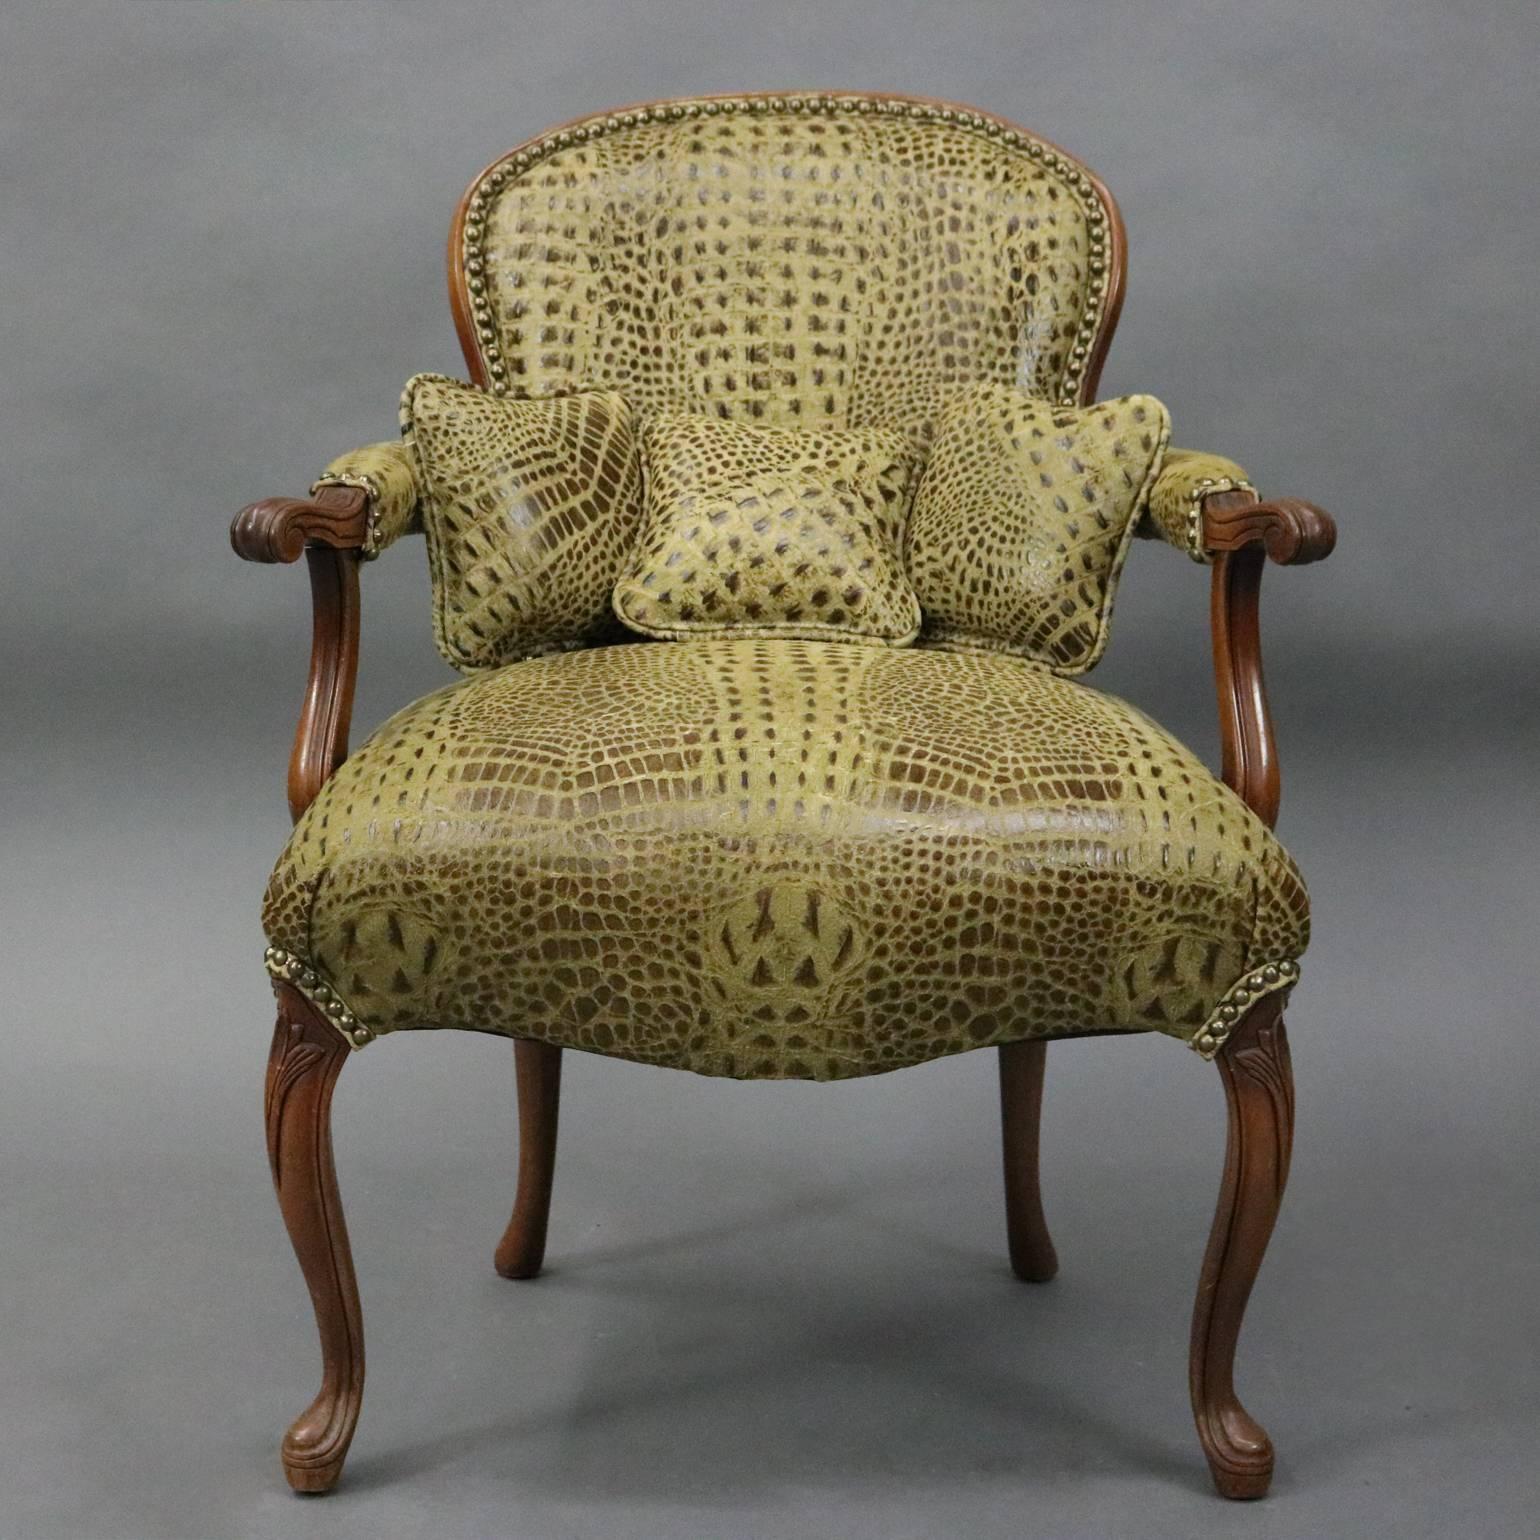 20th Century Vintage French Alligator Print Leather Louis XV Style Armchair and Ottoman